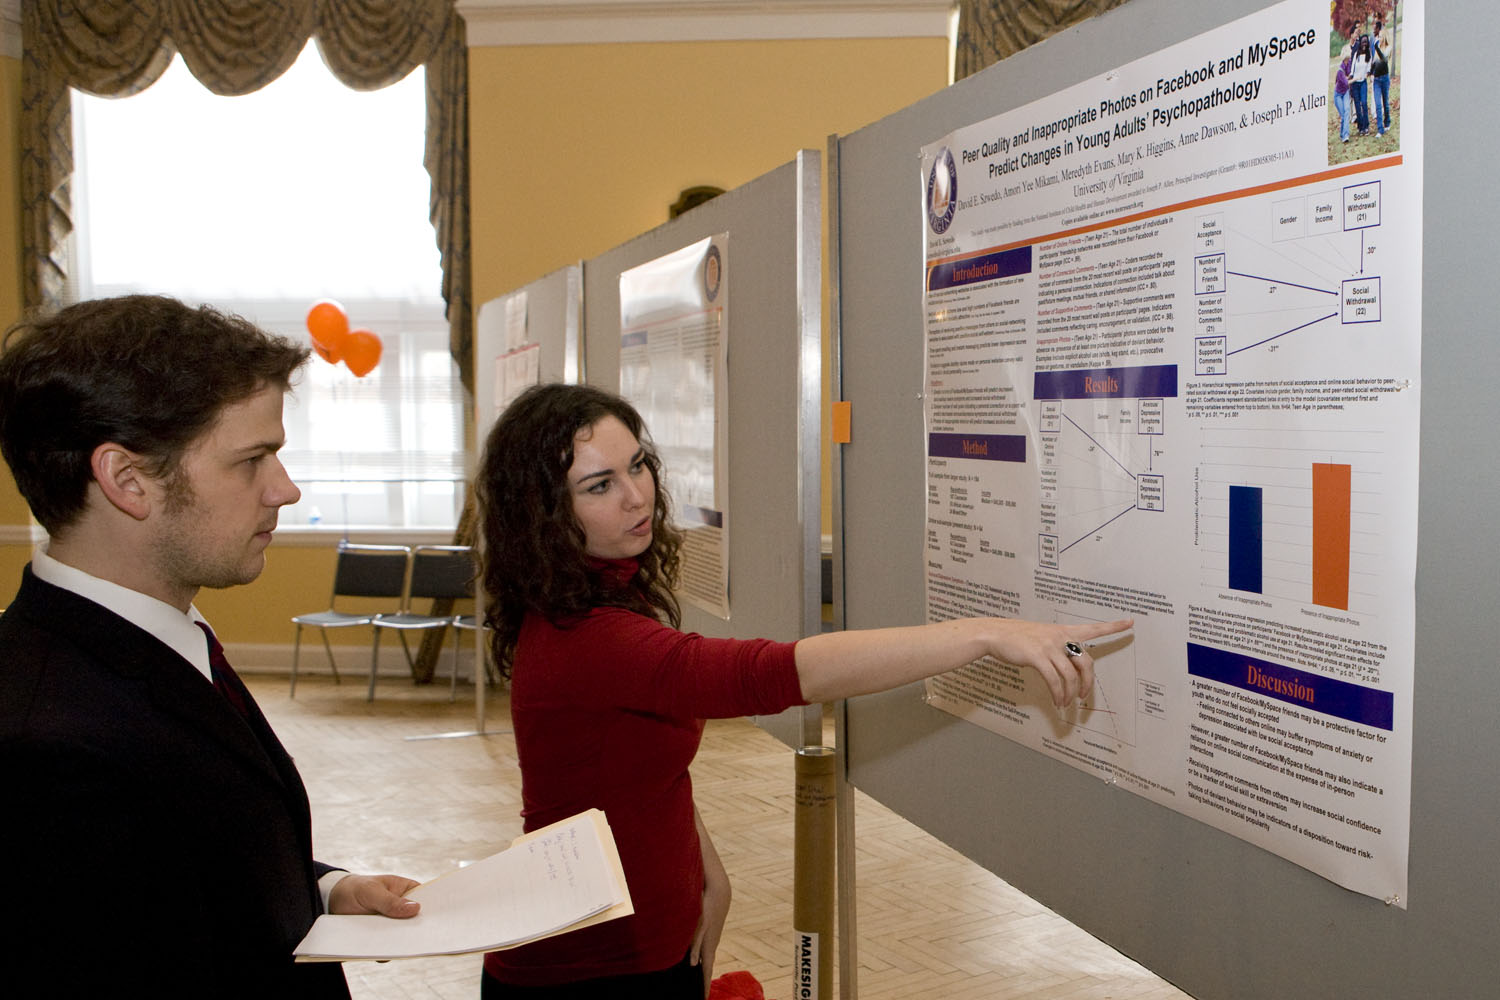 Student presenting her poster to a man